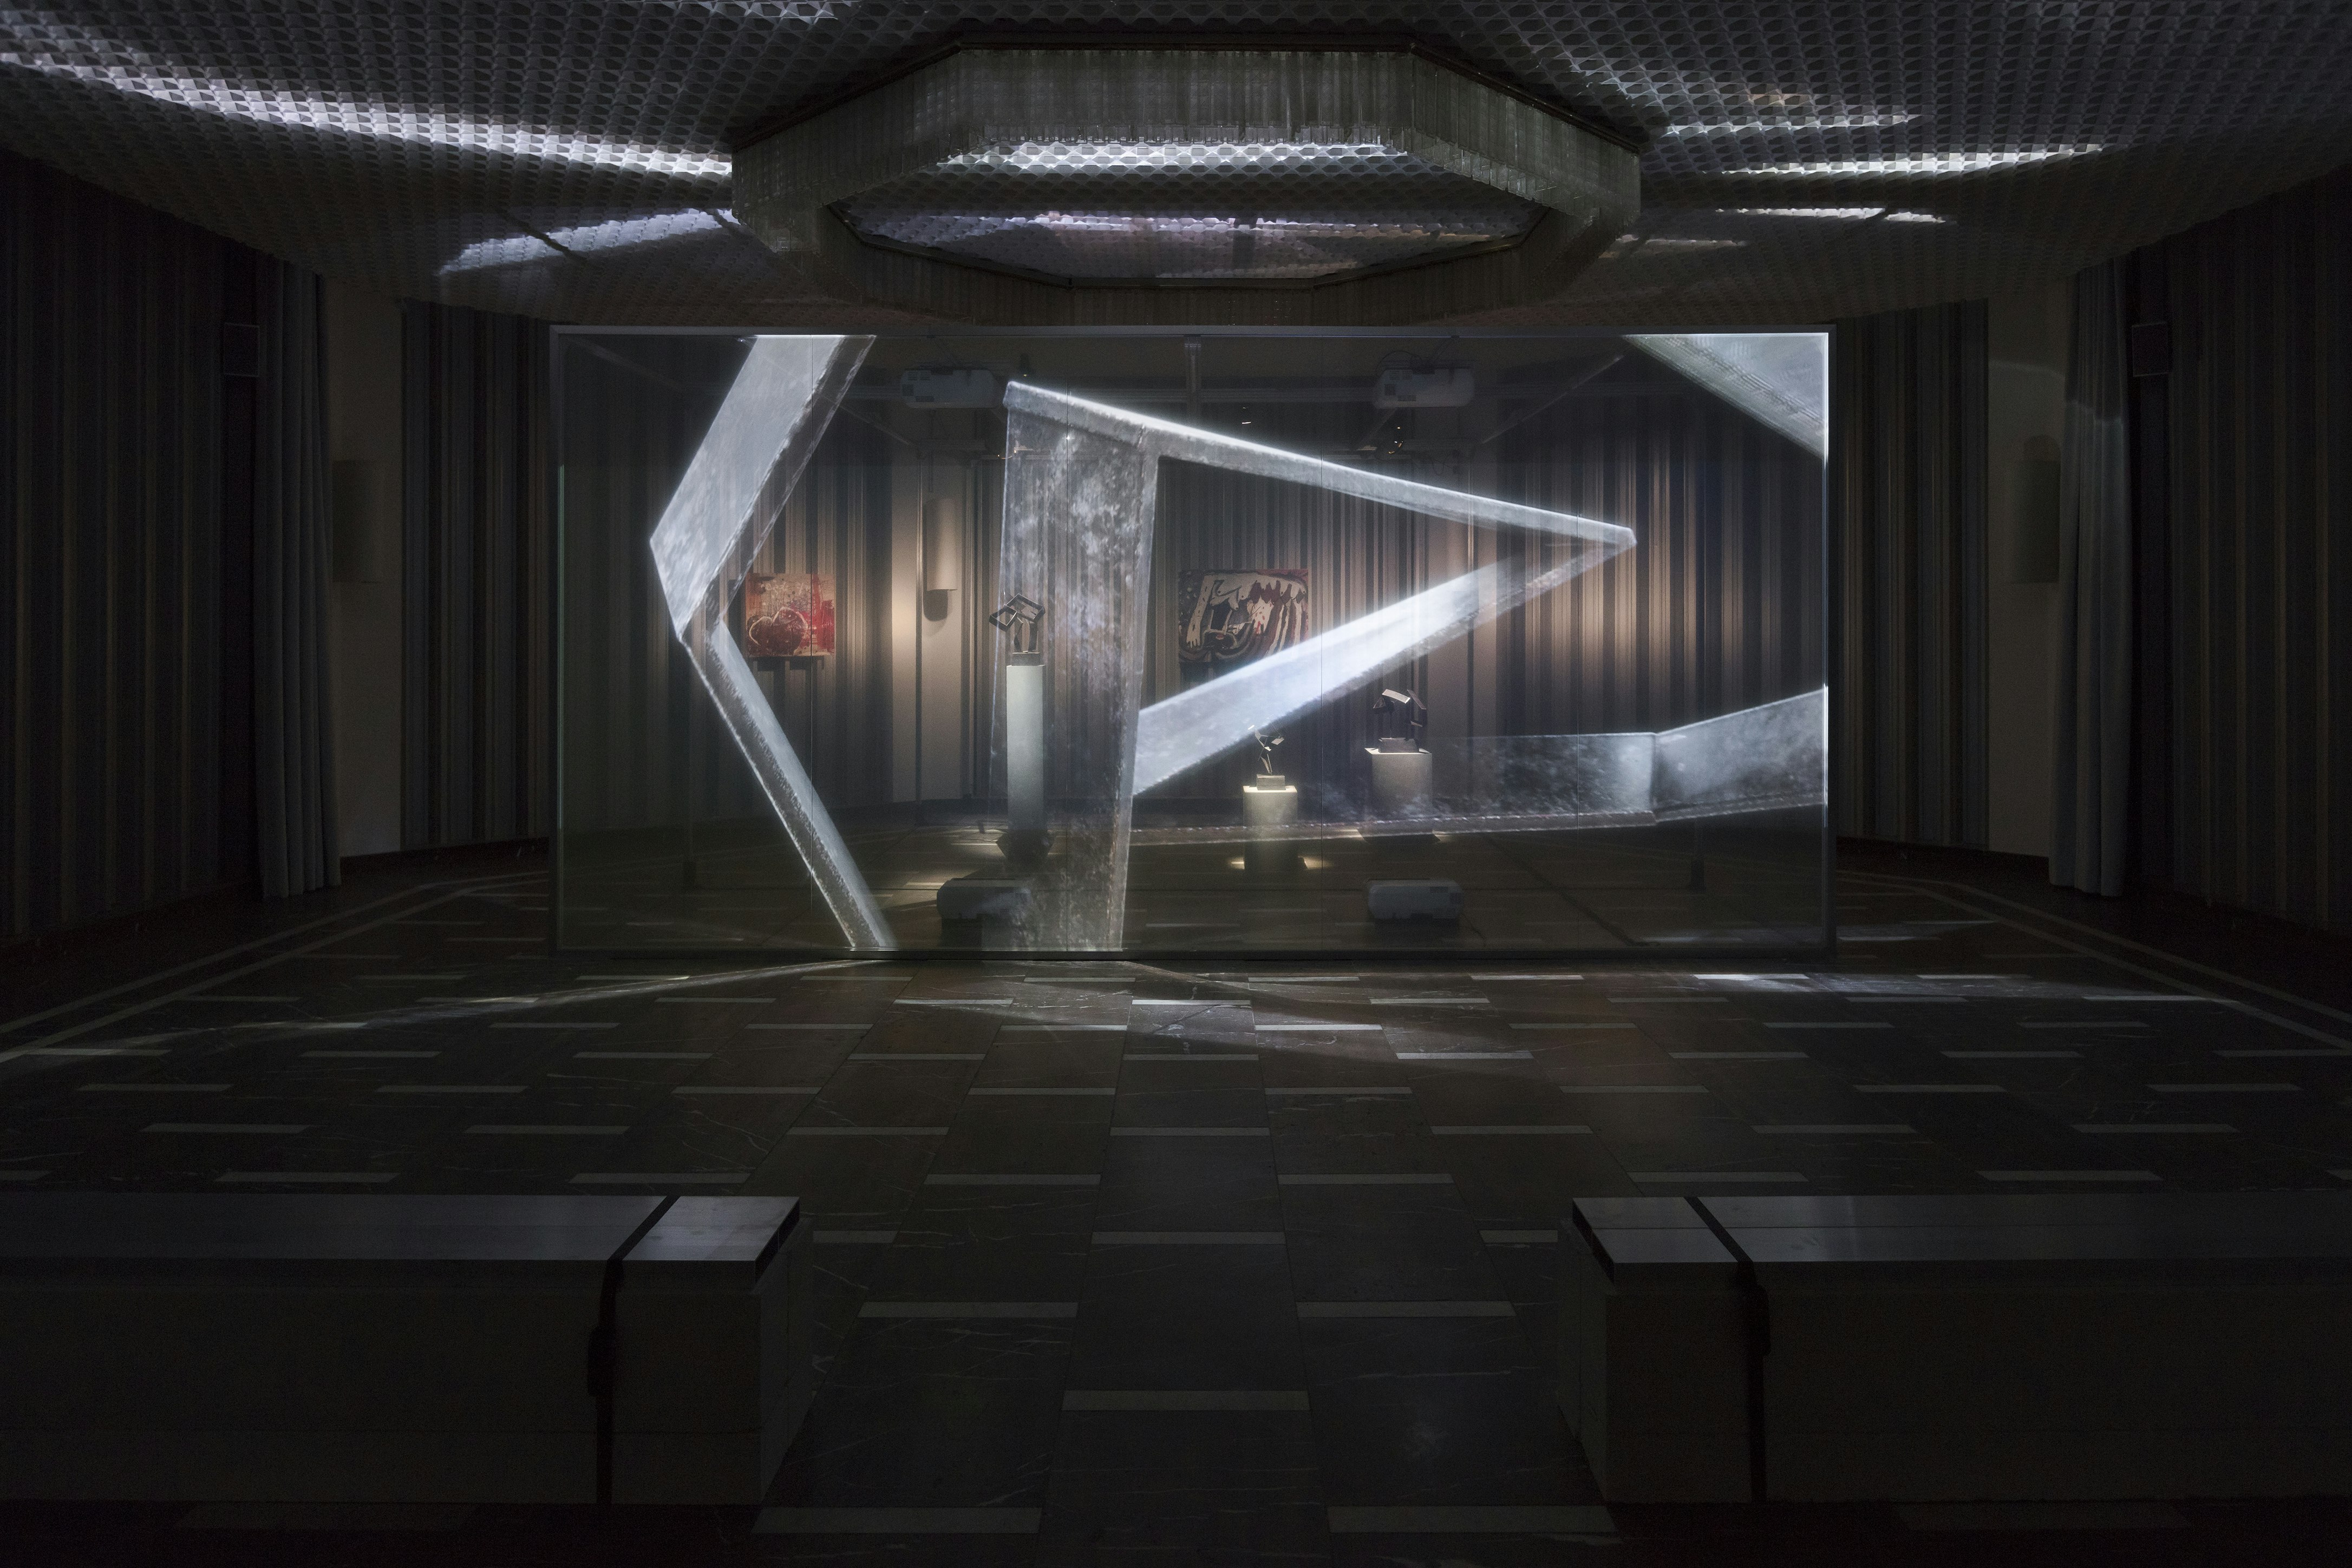 A darkly lit, futuristic gallery space with a film projected onto a large transparent screen.